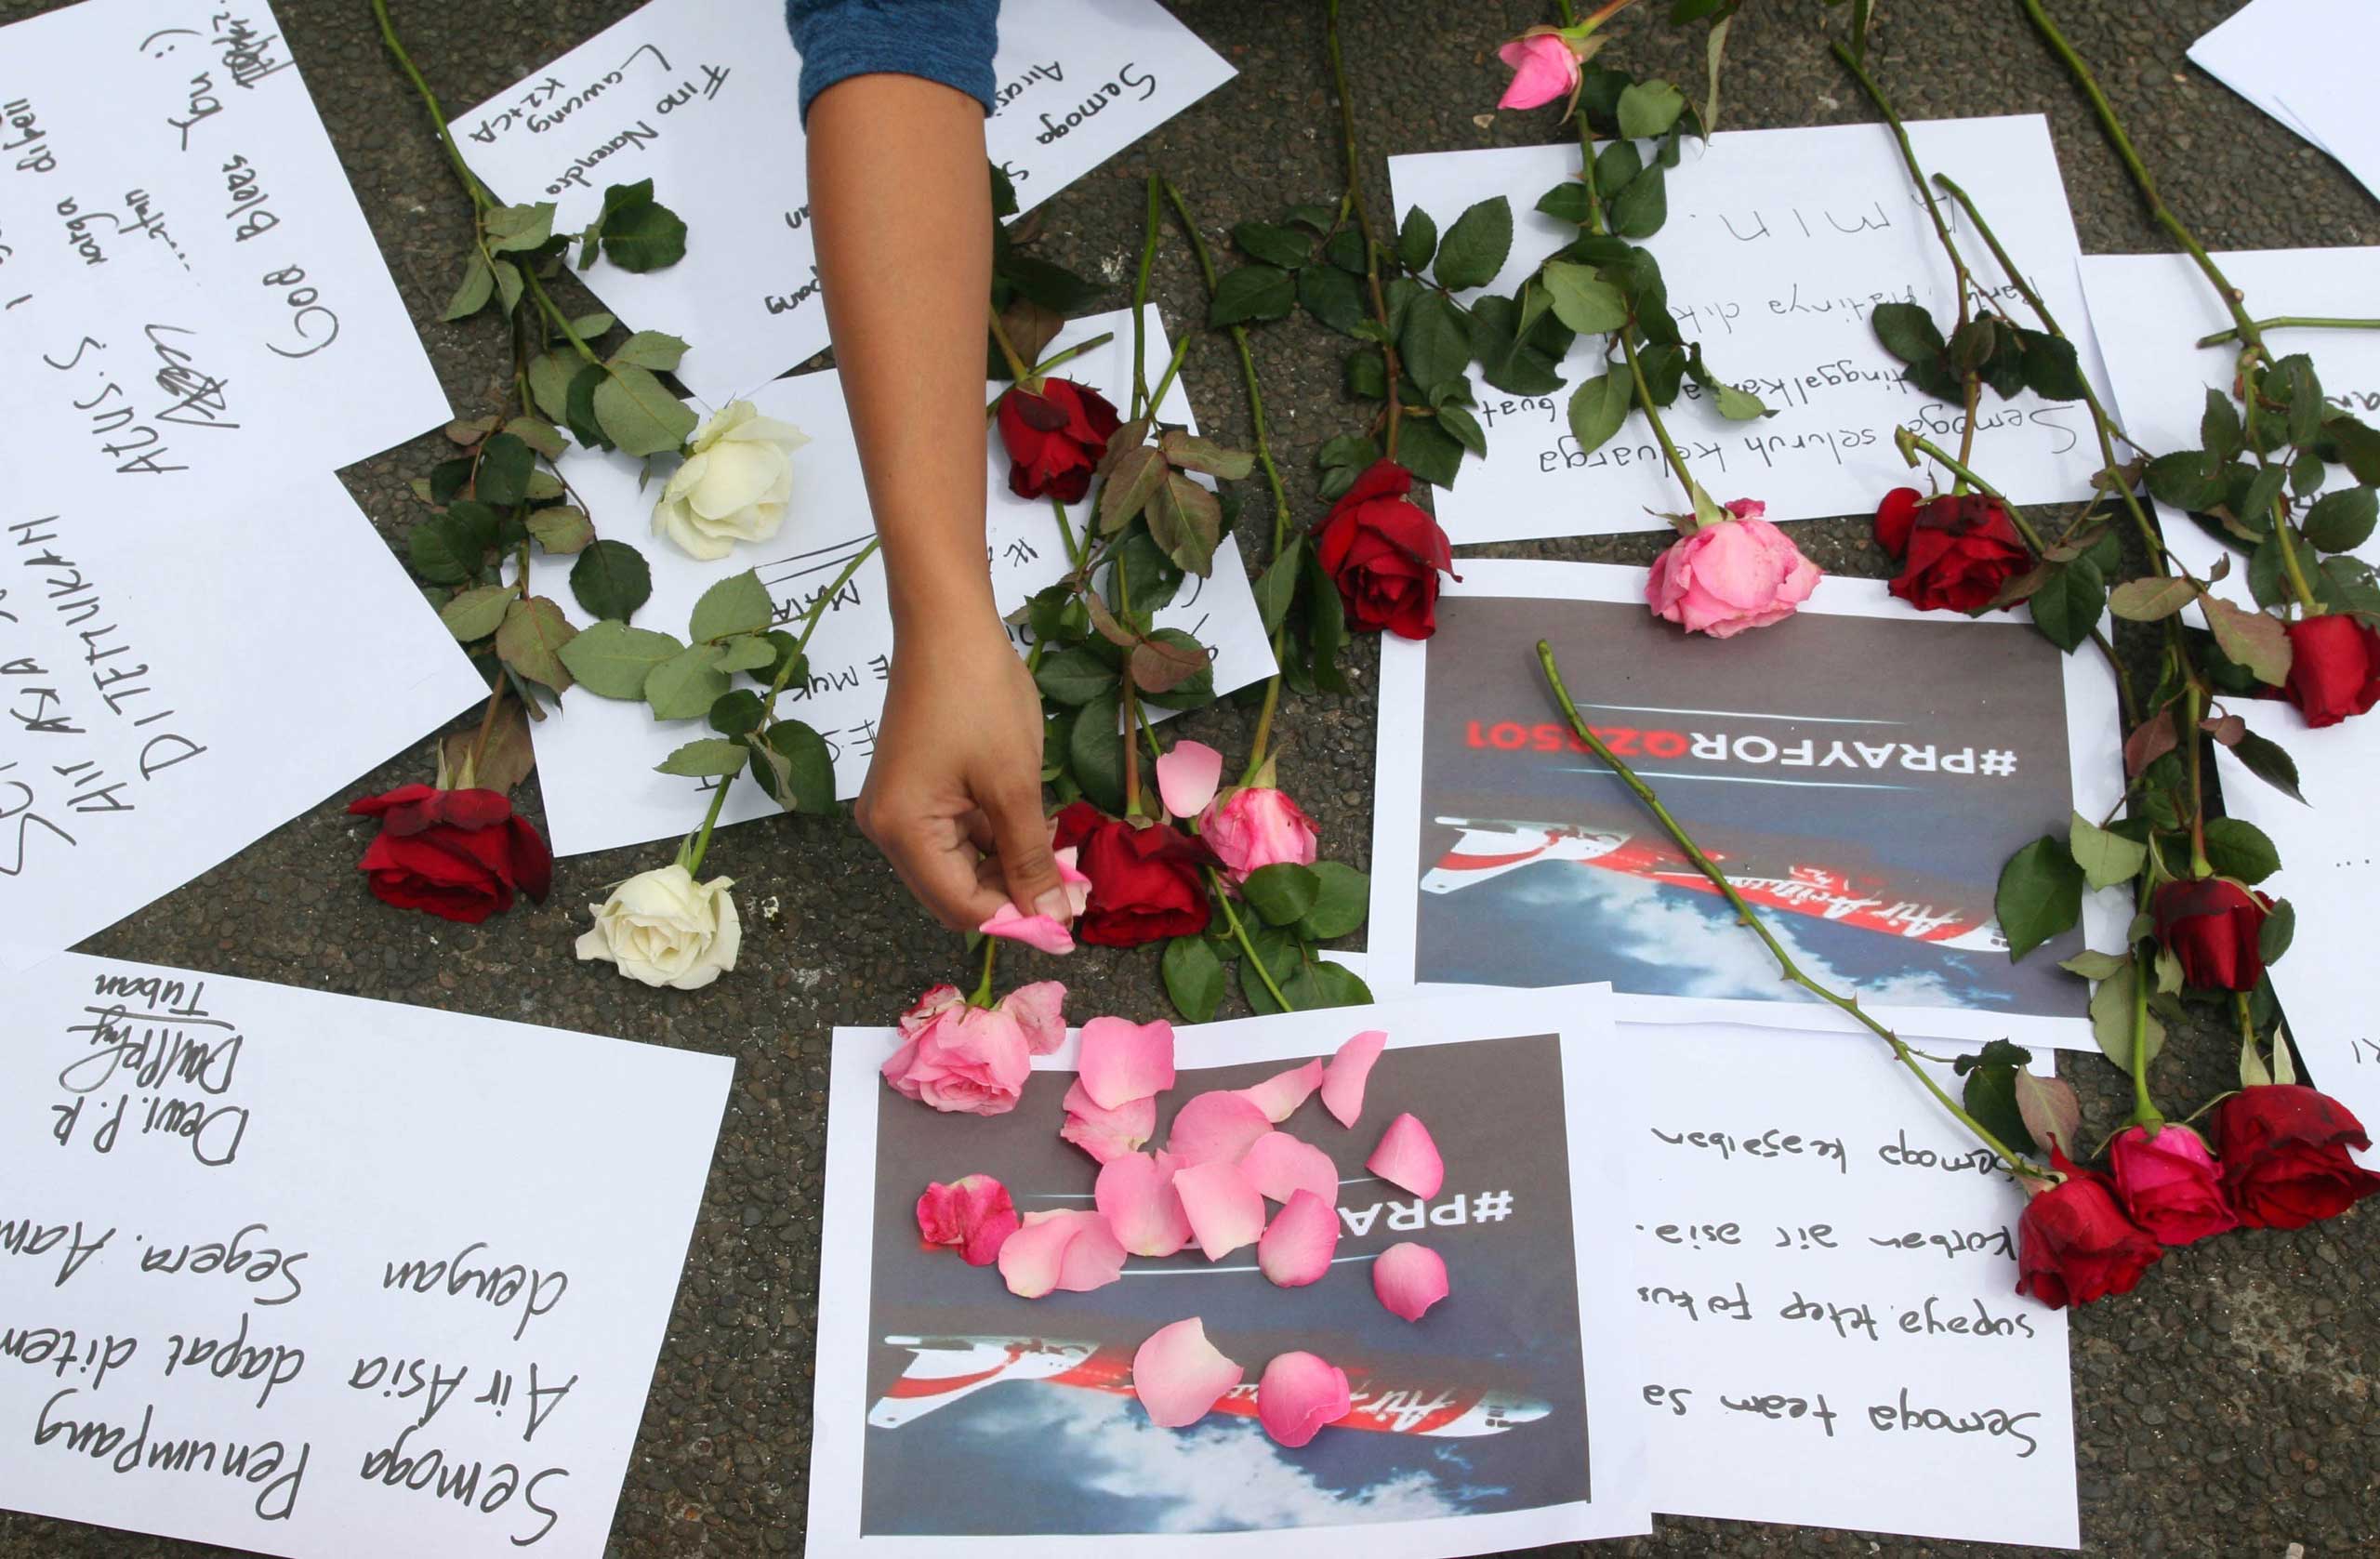 An Indonesian woman lays flowers as people pray for passengers of the missing AirAsia flight QZ8501 in Malang, East Java, Indonesia on Dec. 30, 2014.